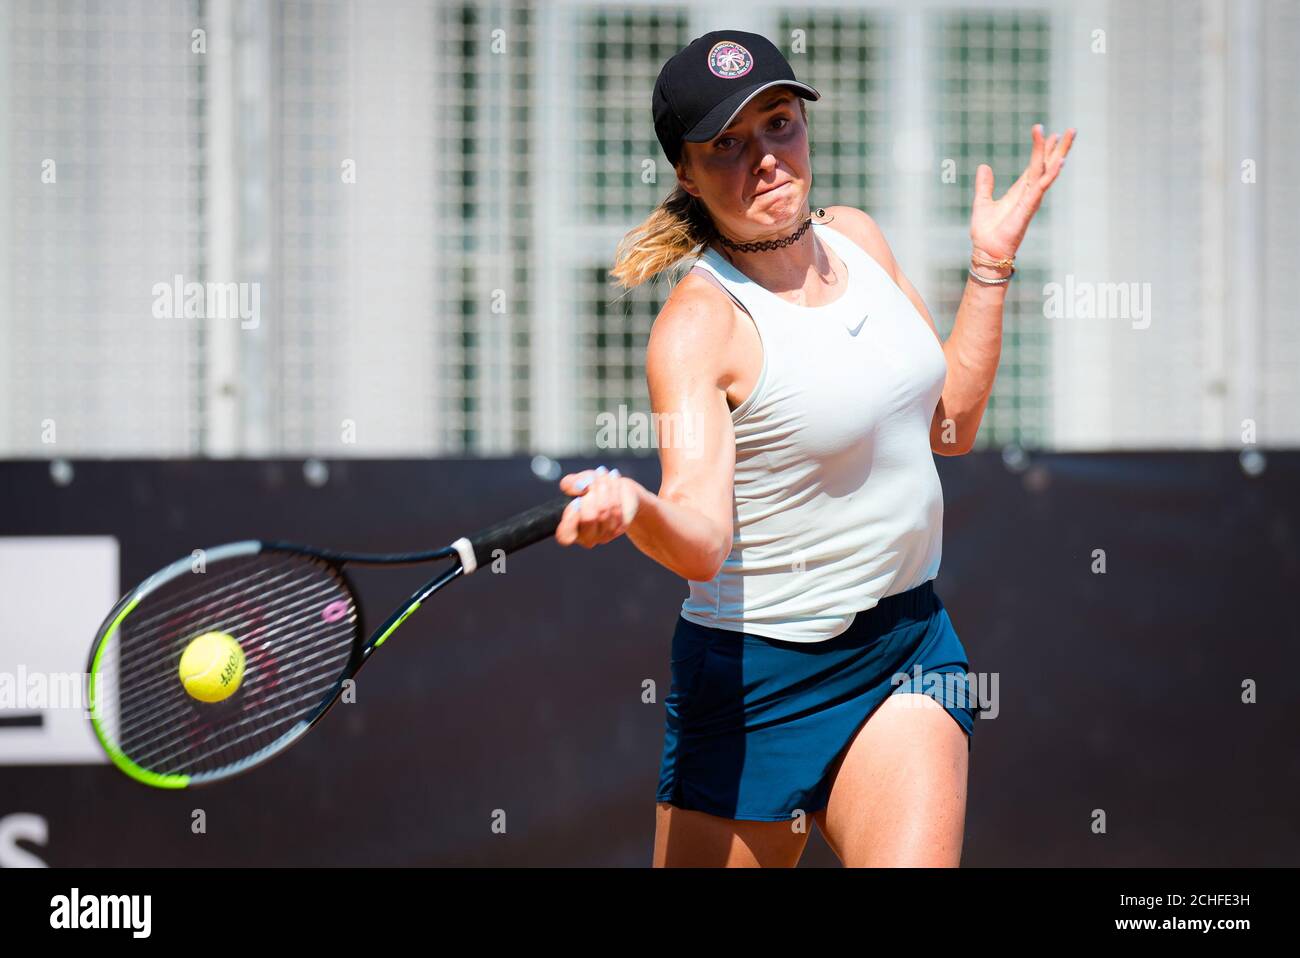 Rome, Italy. 14th September, 2020. Elina Svitolina of the Ukraine during  practice at the 2020 Internazionali BNL d'Italia WTA Premier 5 tennis  tournament on September 13, 2020 at Foro Italico in Rome,